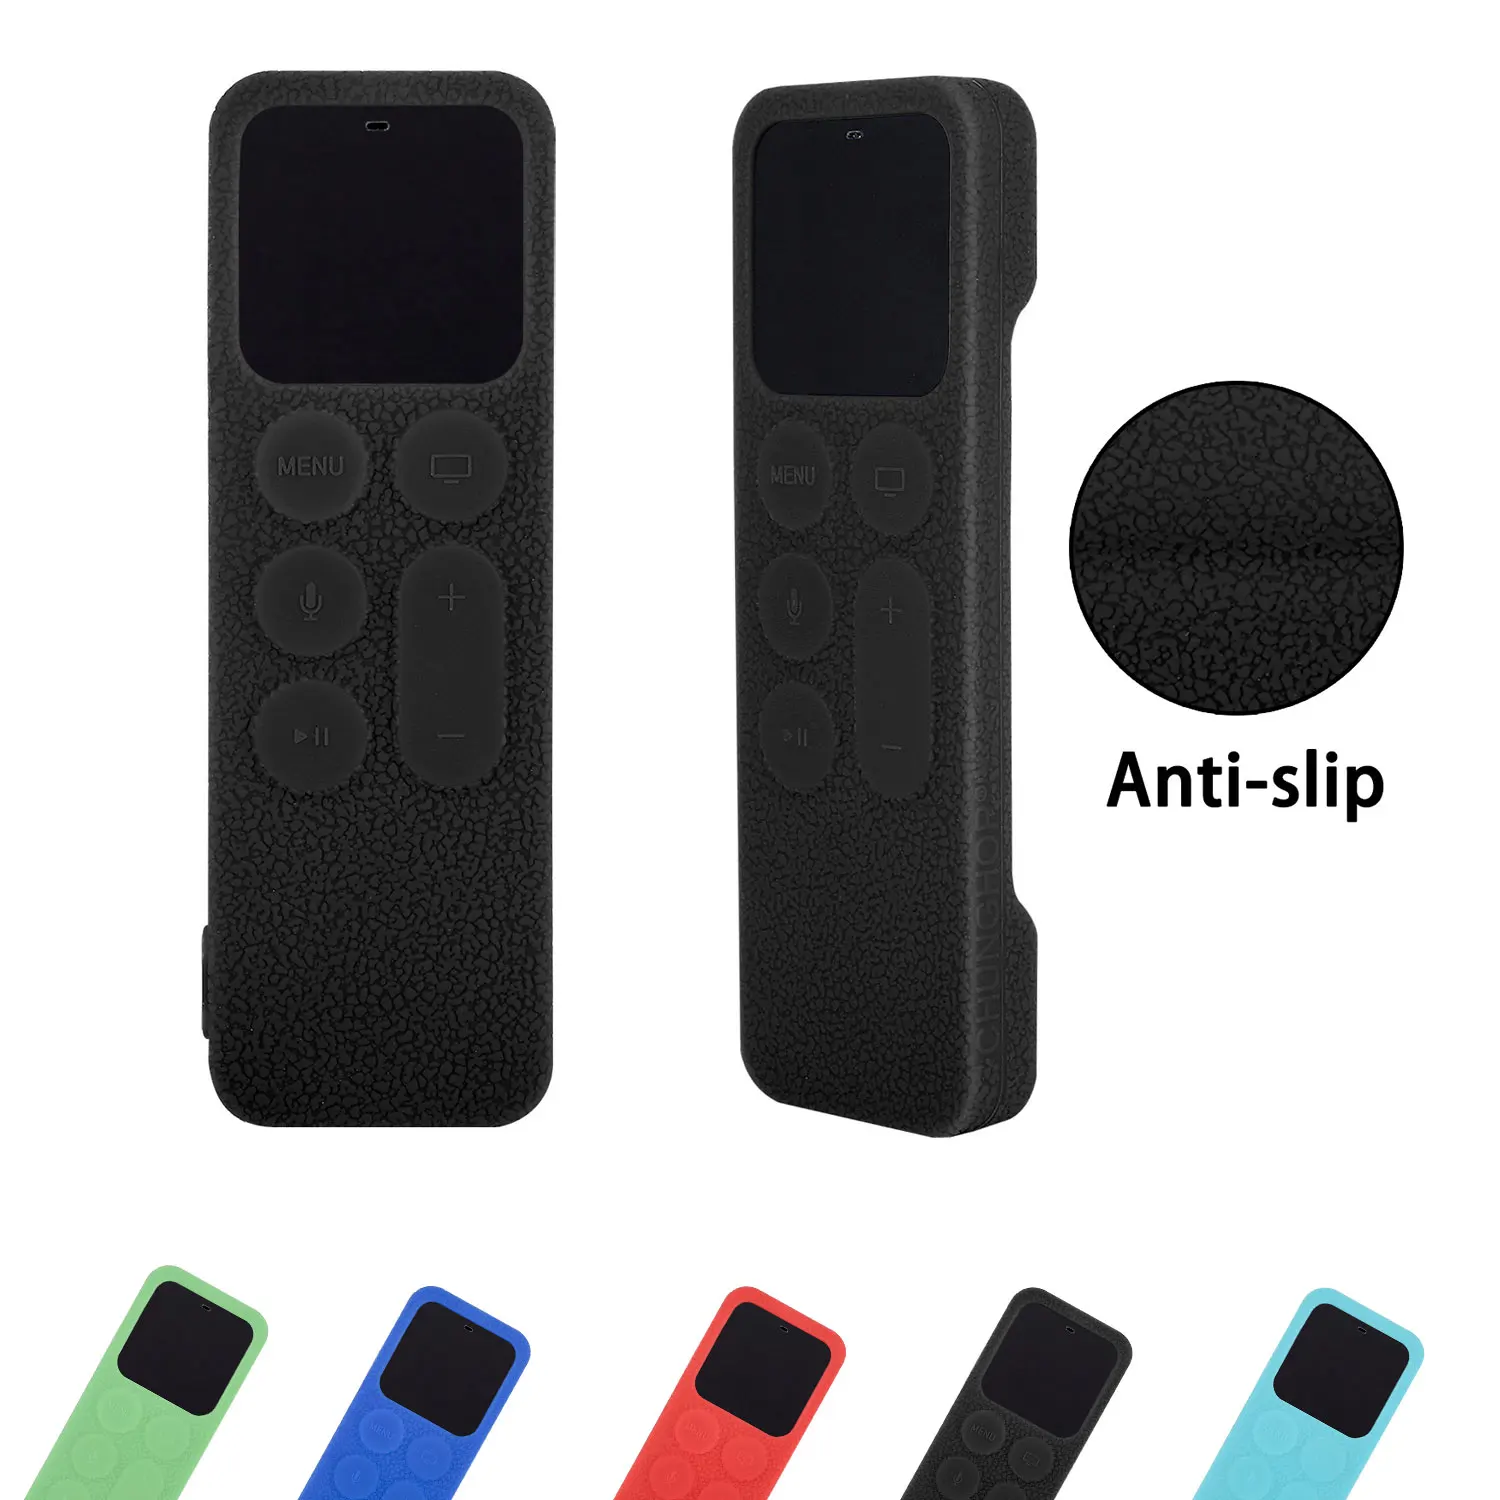 Remote Controller Silicone Dustproof Cover Home Storage Protective Case for Apple TV Remote Controller Case For Apple TV 4